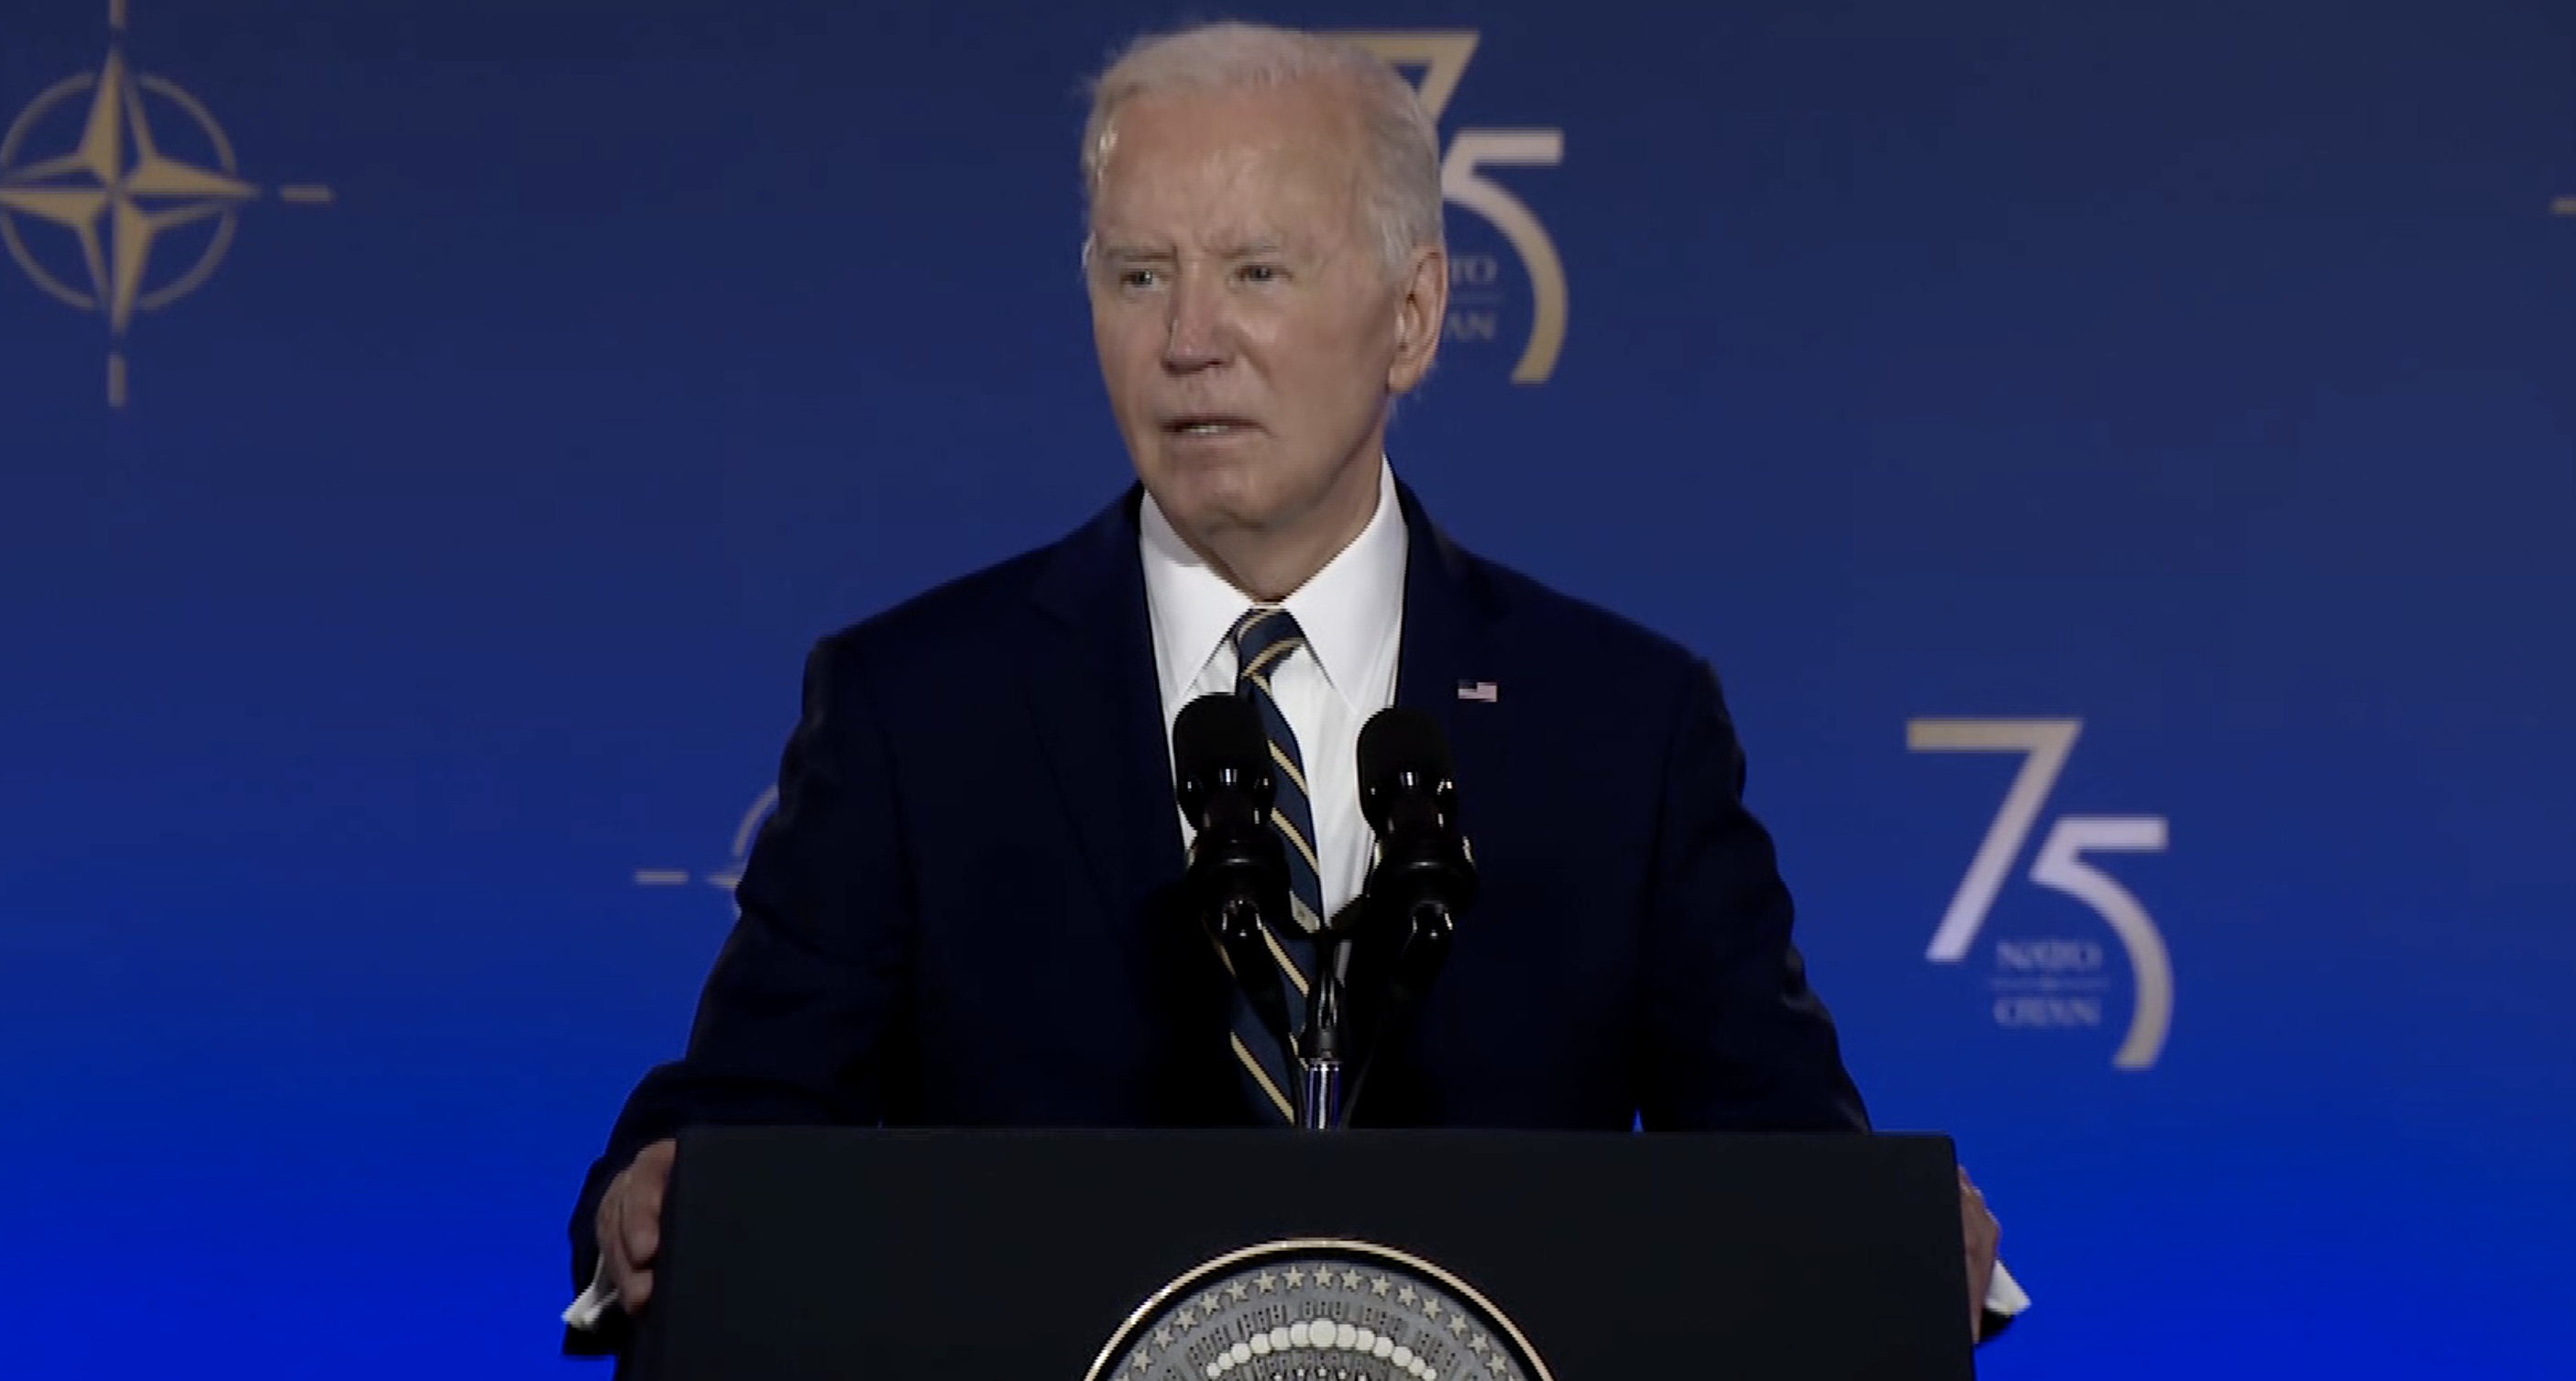 Biden Delivers NATO Speech as Questions Surrounding Reelection Chances Intensify